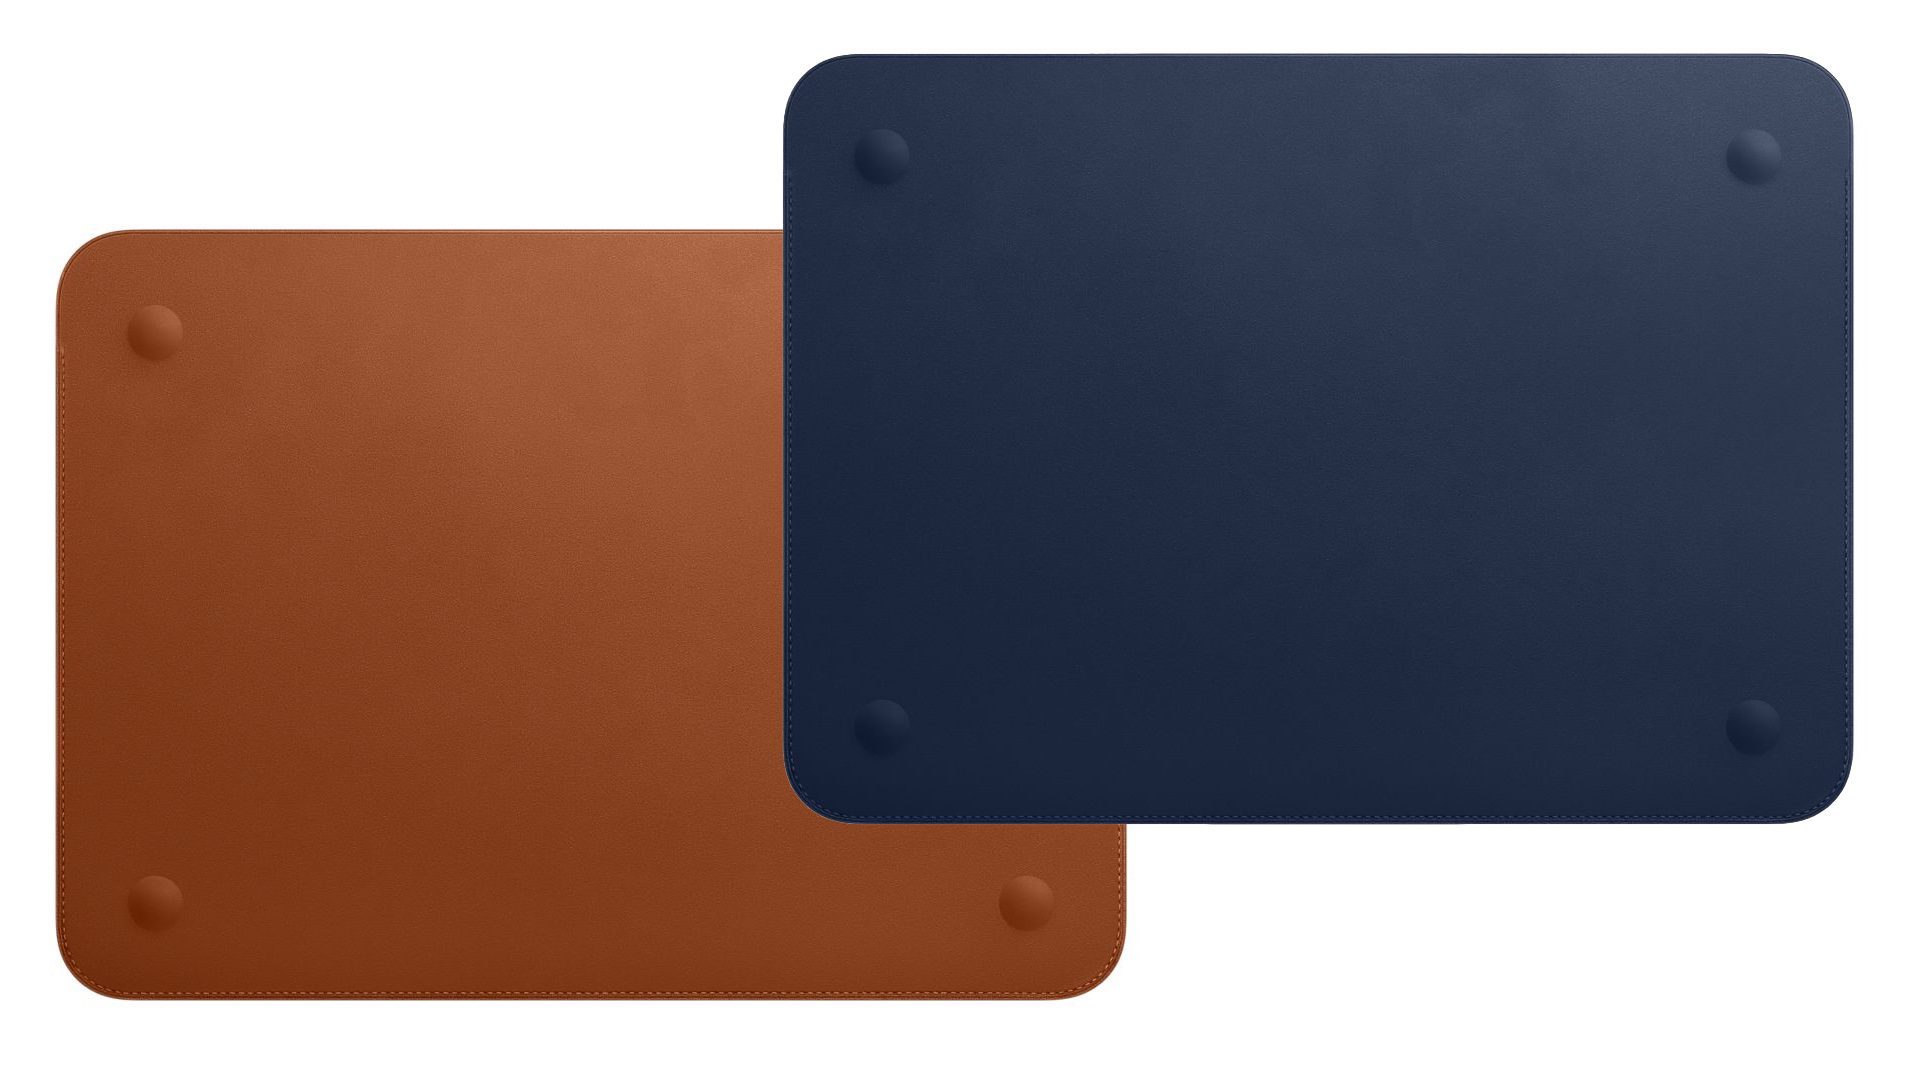 Apple Just Released a Leather MacBook Sleeve and It Will Only Cost You RM679! - WORLD OF BUZZ